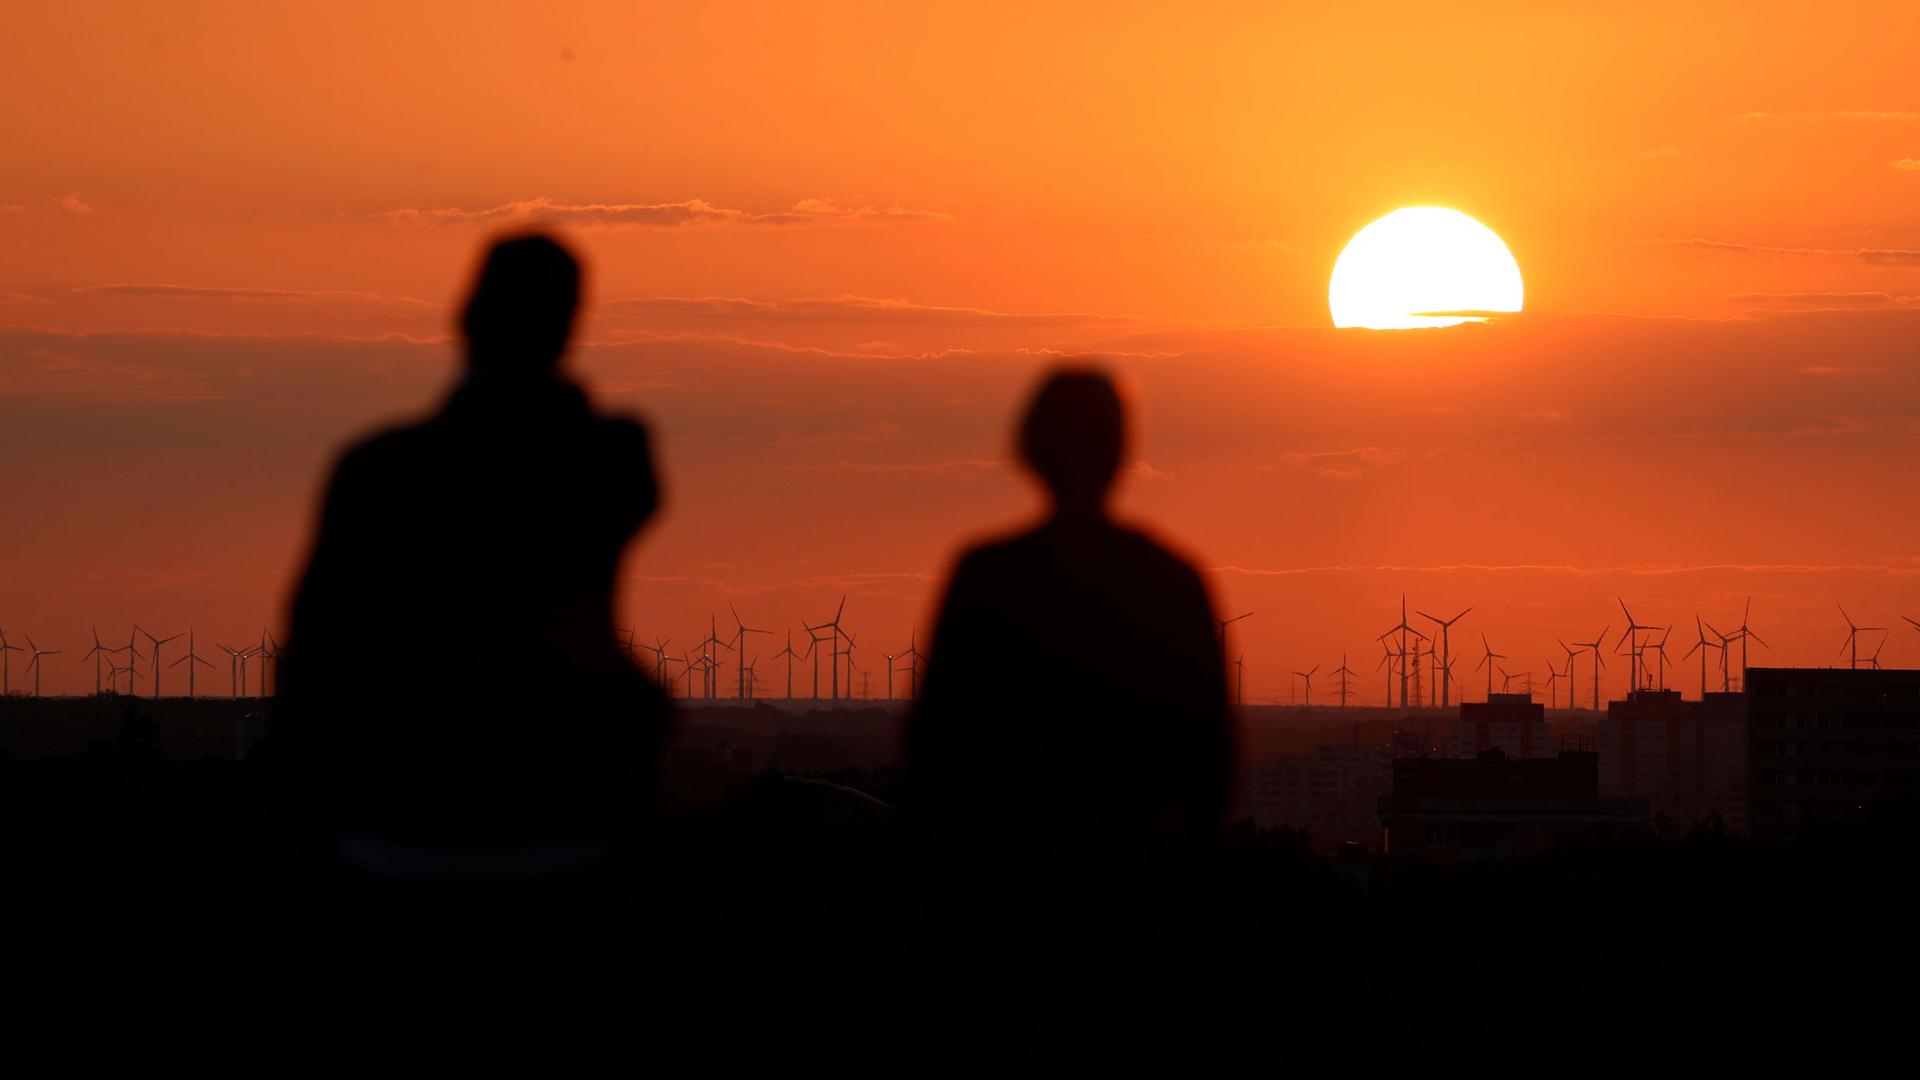 A bright orange sunset is shown in the distance with several wind turbines in the distance and two people in shadow in the nearground.